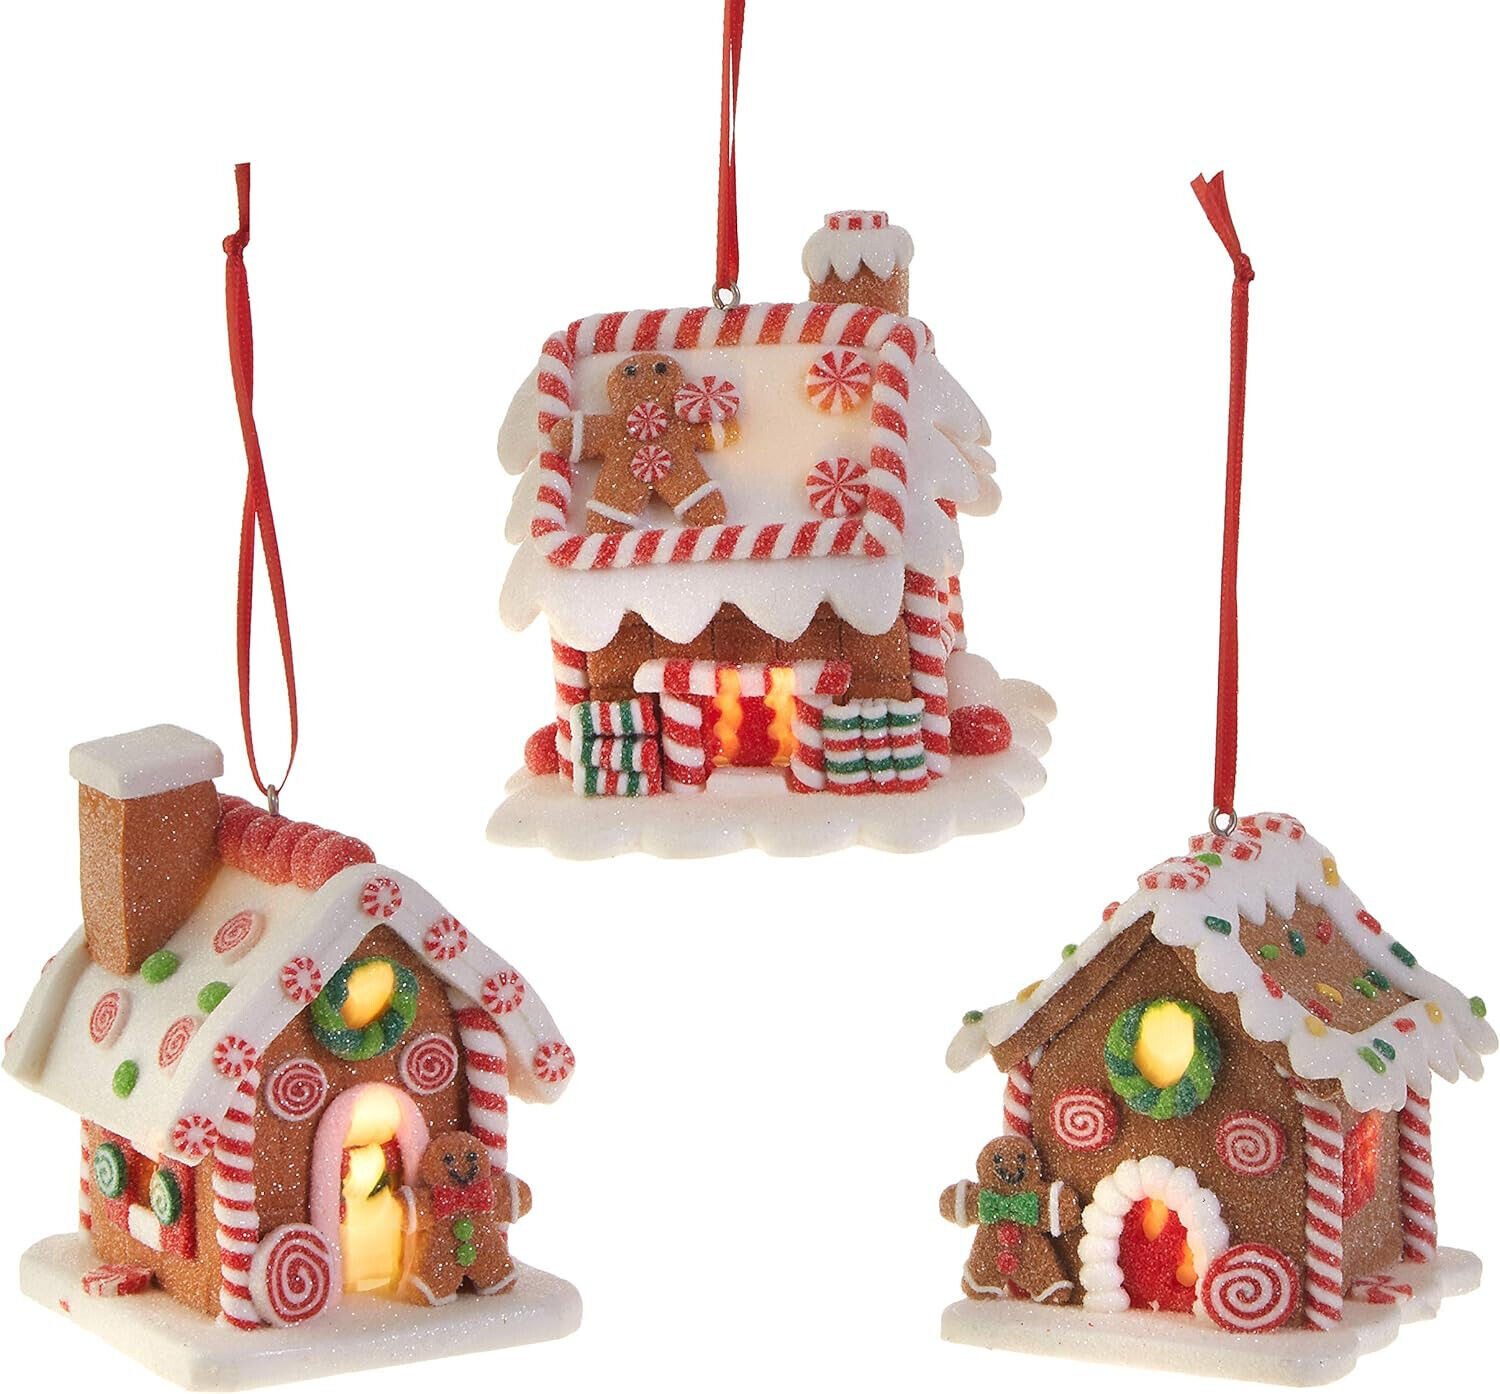 Set of 3 Hanging Lighted Gingerbread Claydough House Ornaments, Festive Decor